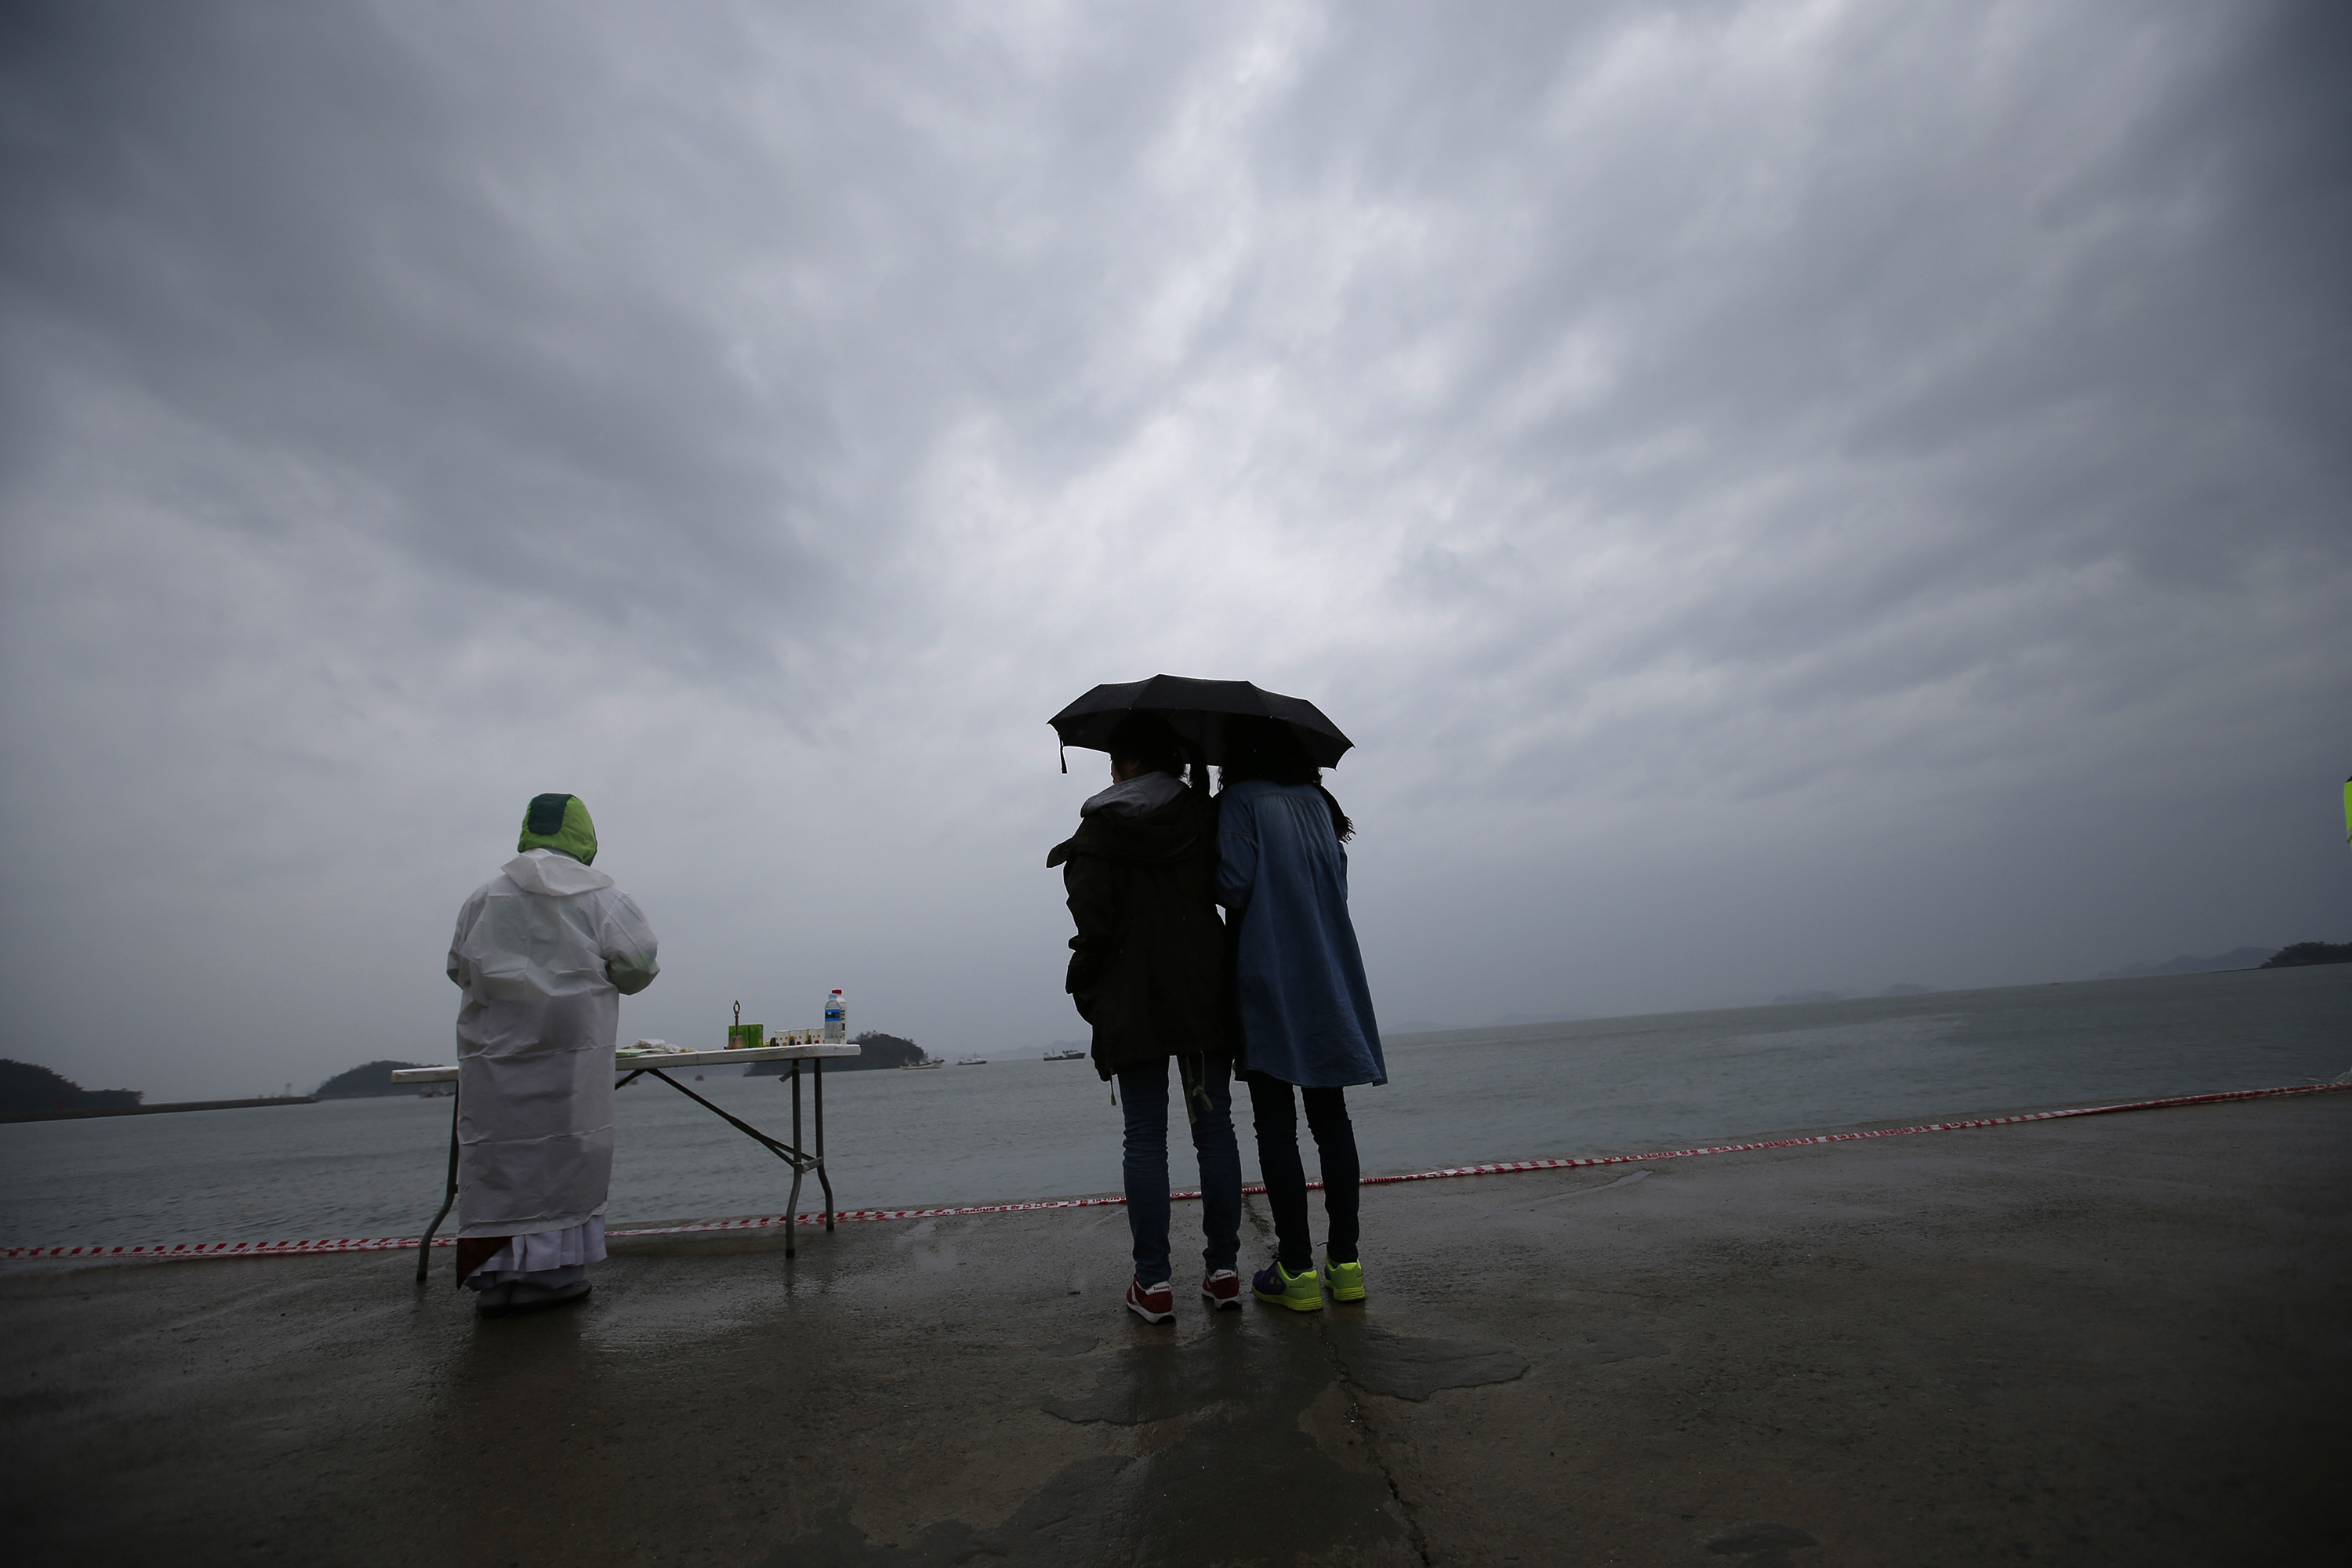 Relatives of a missing passenger onboard the capsized Sewol ferry look at the sea while a Buddhist monk prays for the victims at a port in the rain, where family members wait for news from the search and rescue team on April 27, 2014. (Kim Kyung Hoon—Reuters)